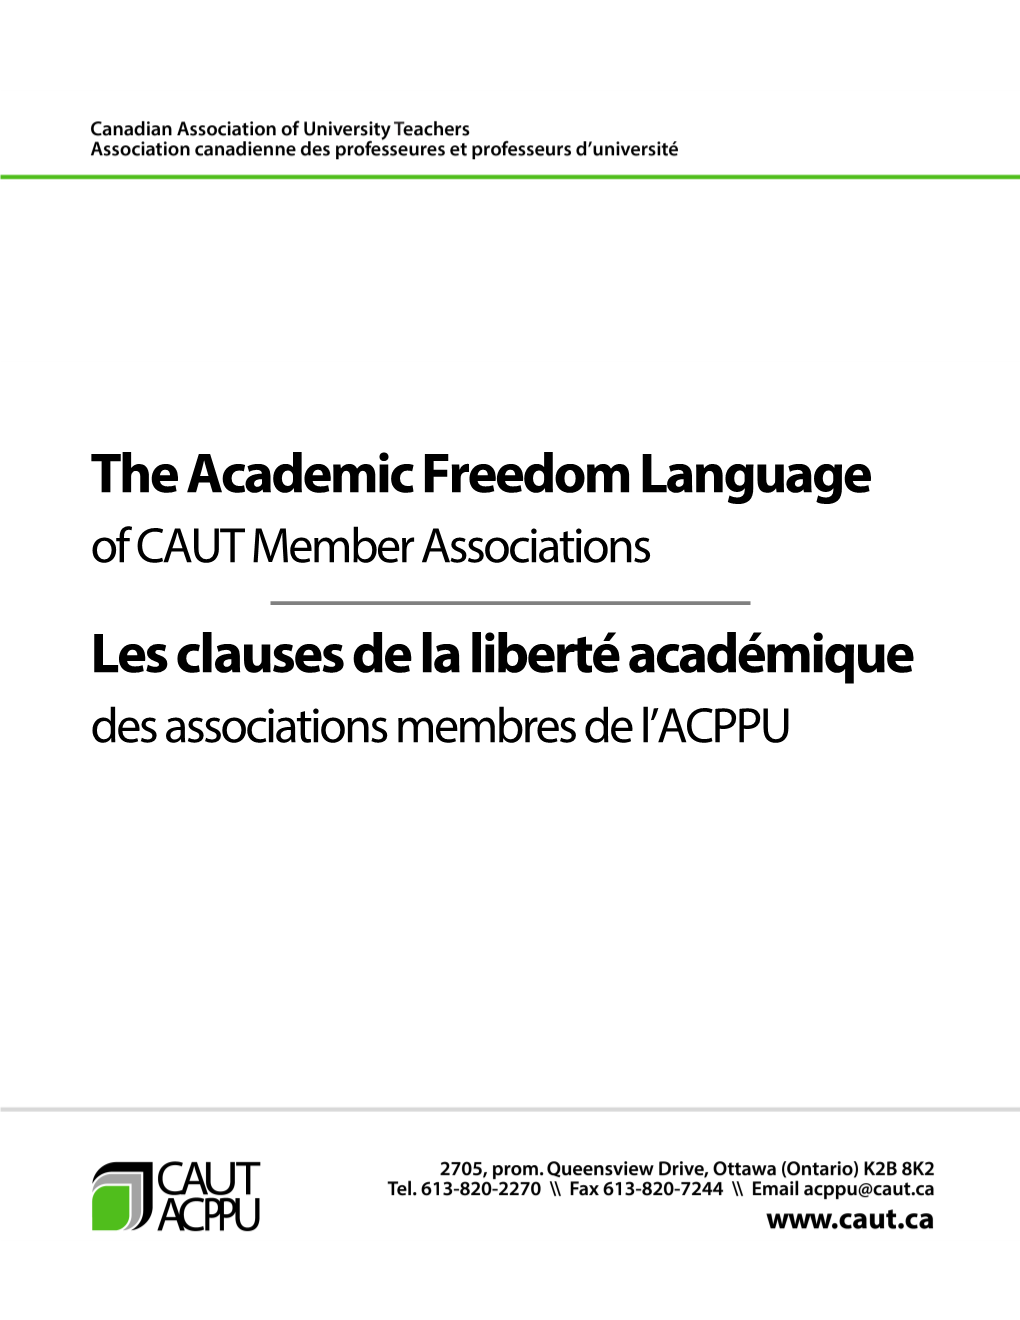 The Academic Freedom Language of CAUT Member Associations